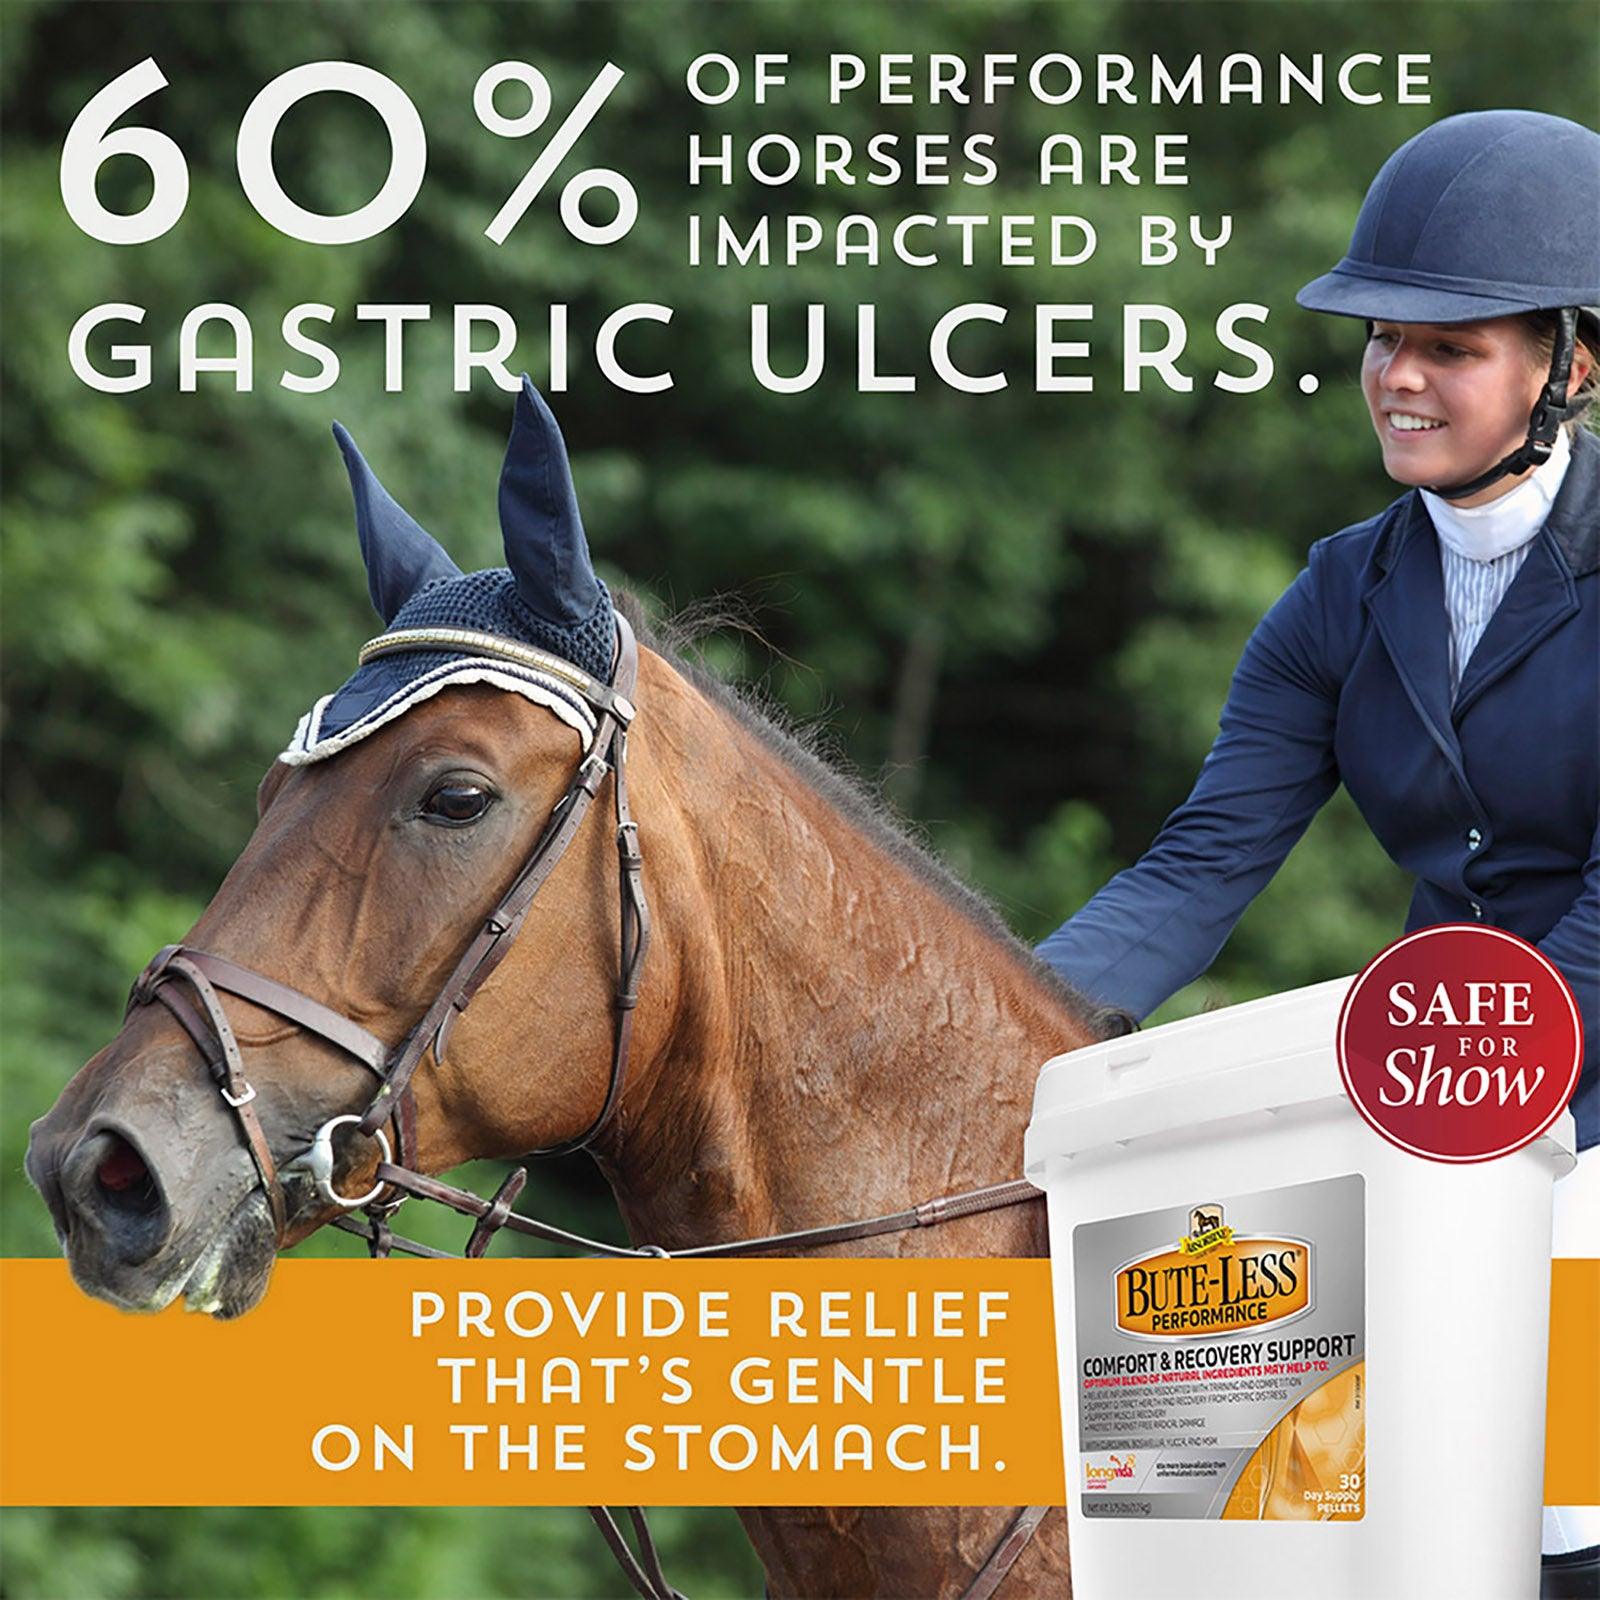 Bute-Less® Performance Comfort & Recovery Supplement Pellets Supplements absorbine   